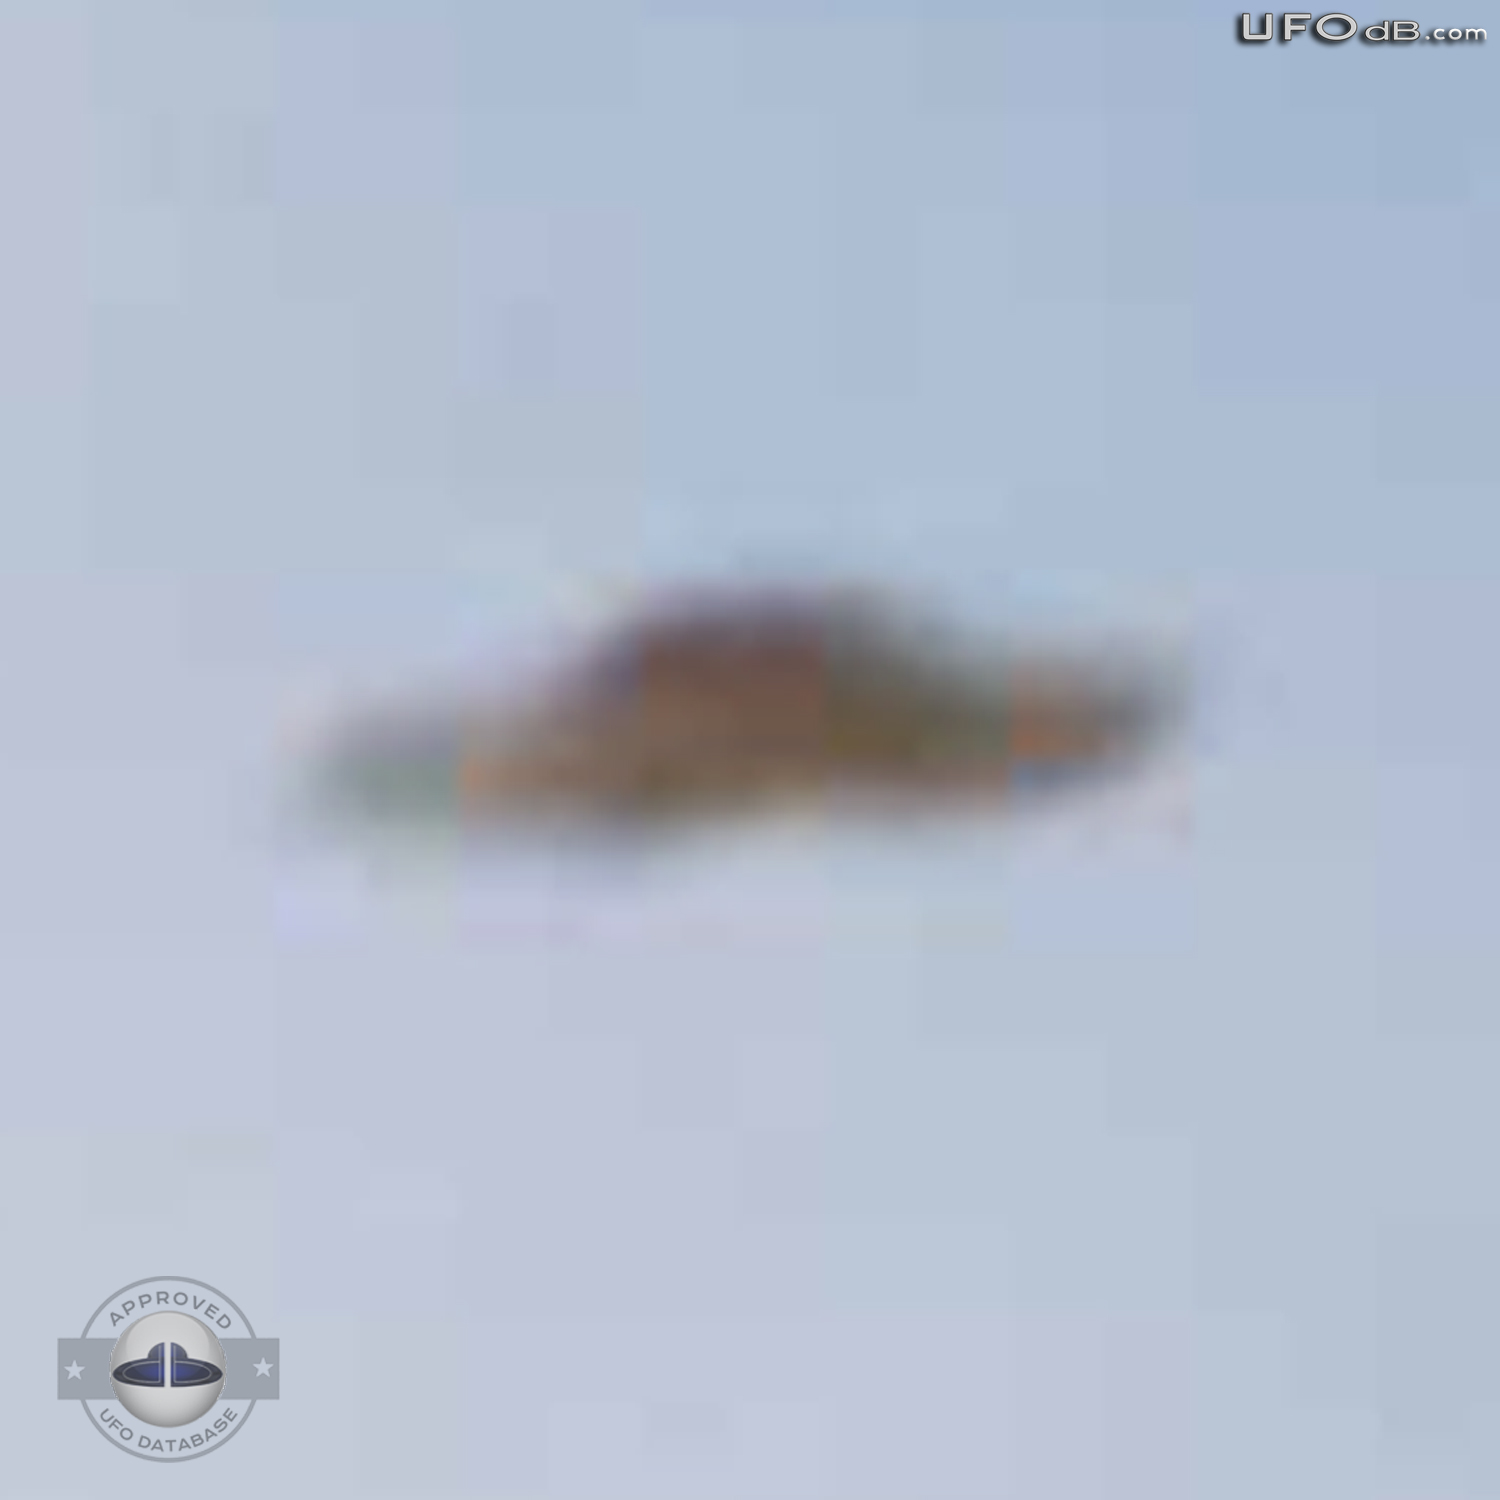 Amsterdam weed grower see three saucer UFOs passing in the sky UFO Picture #366-7